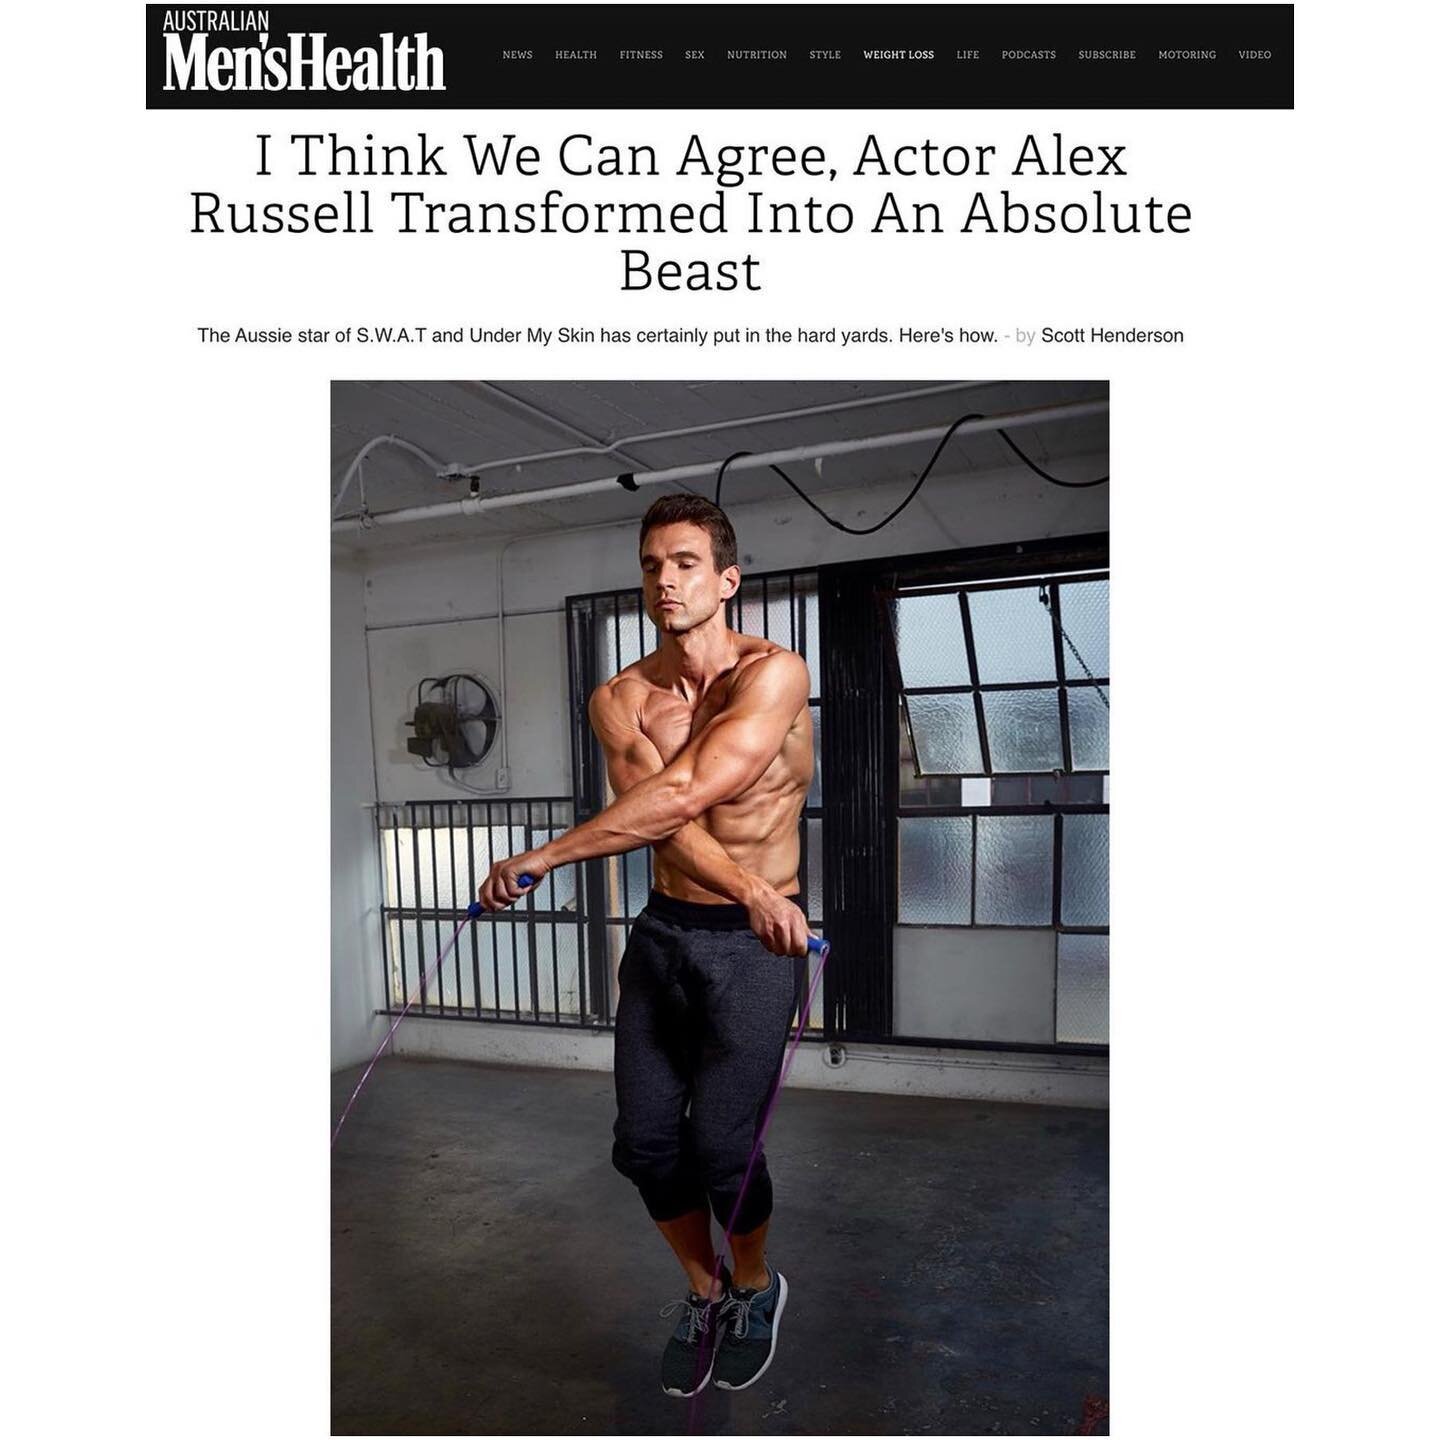 @alexrussell deserves all the 🙌🏽 

He worked so hard for our shoot. 

Thank you @menshealthau for the amazing piece. 

Stylist @lisemora 
Groomer @paige__davenport 
Photo Asst. @arsen_ist 
Digitals @noahasanias 

Thank you @paolomascitti